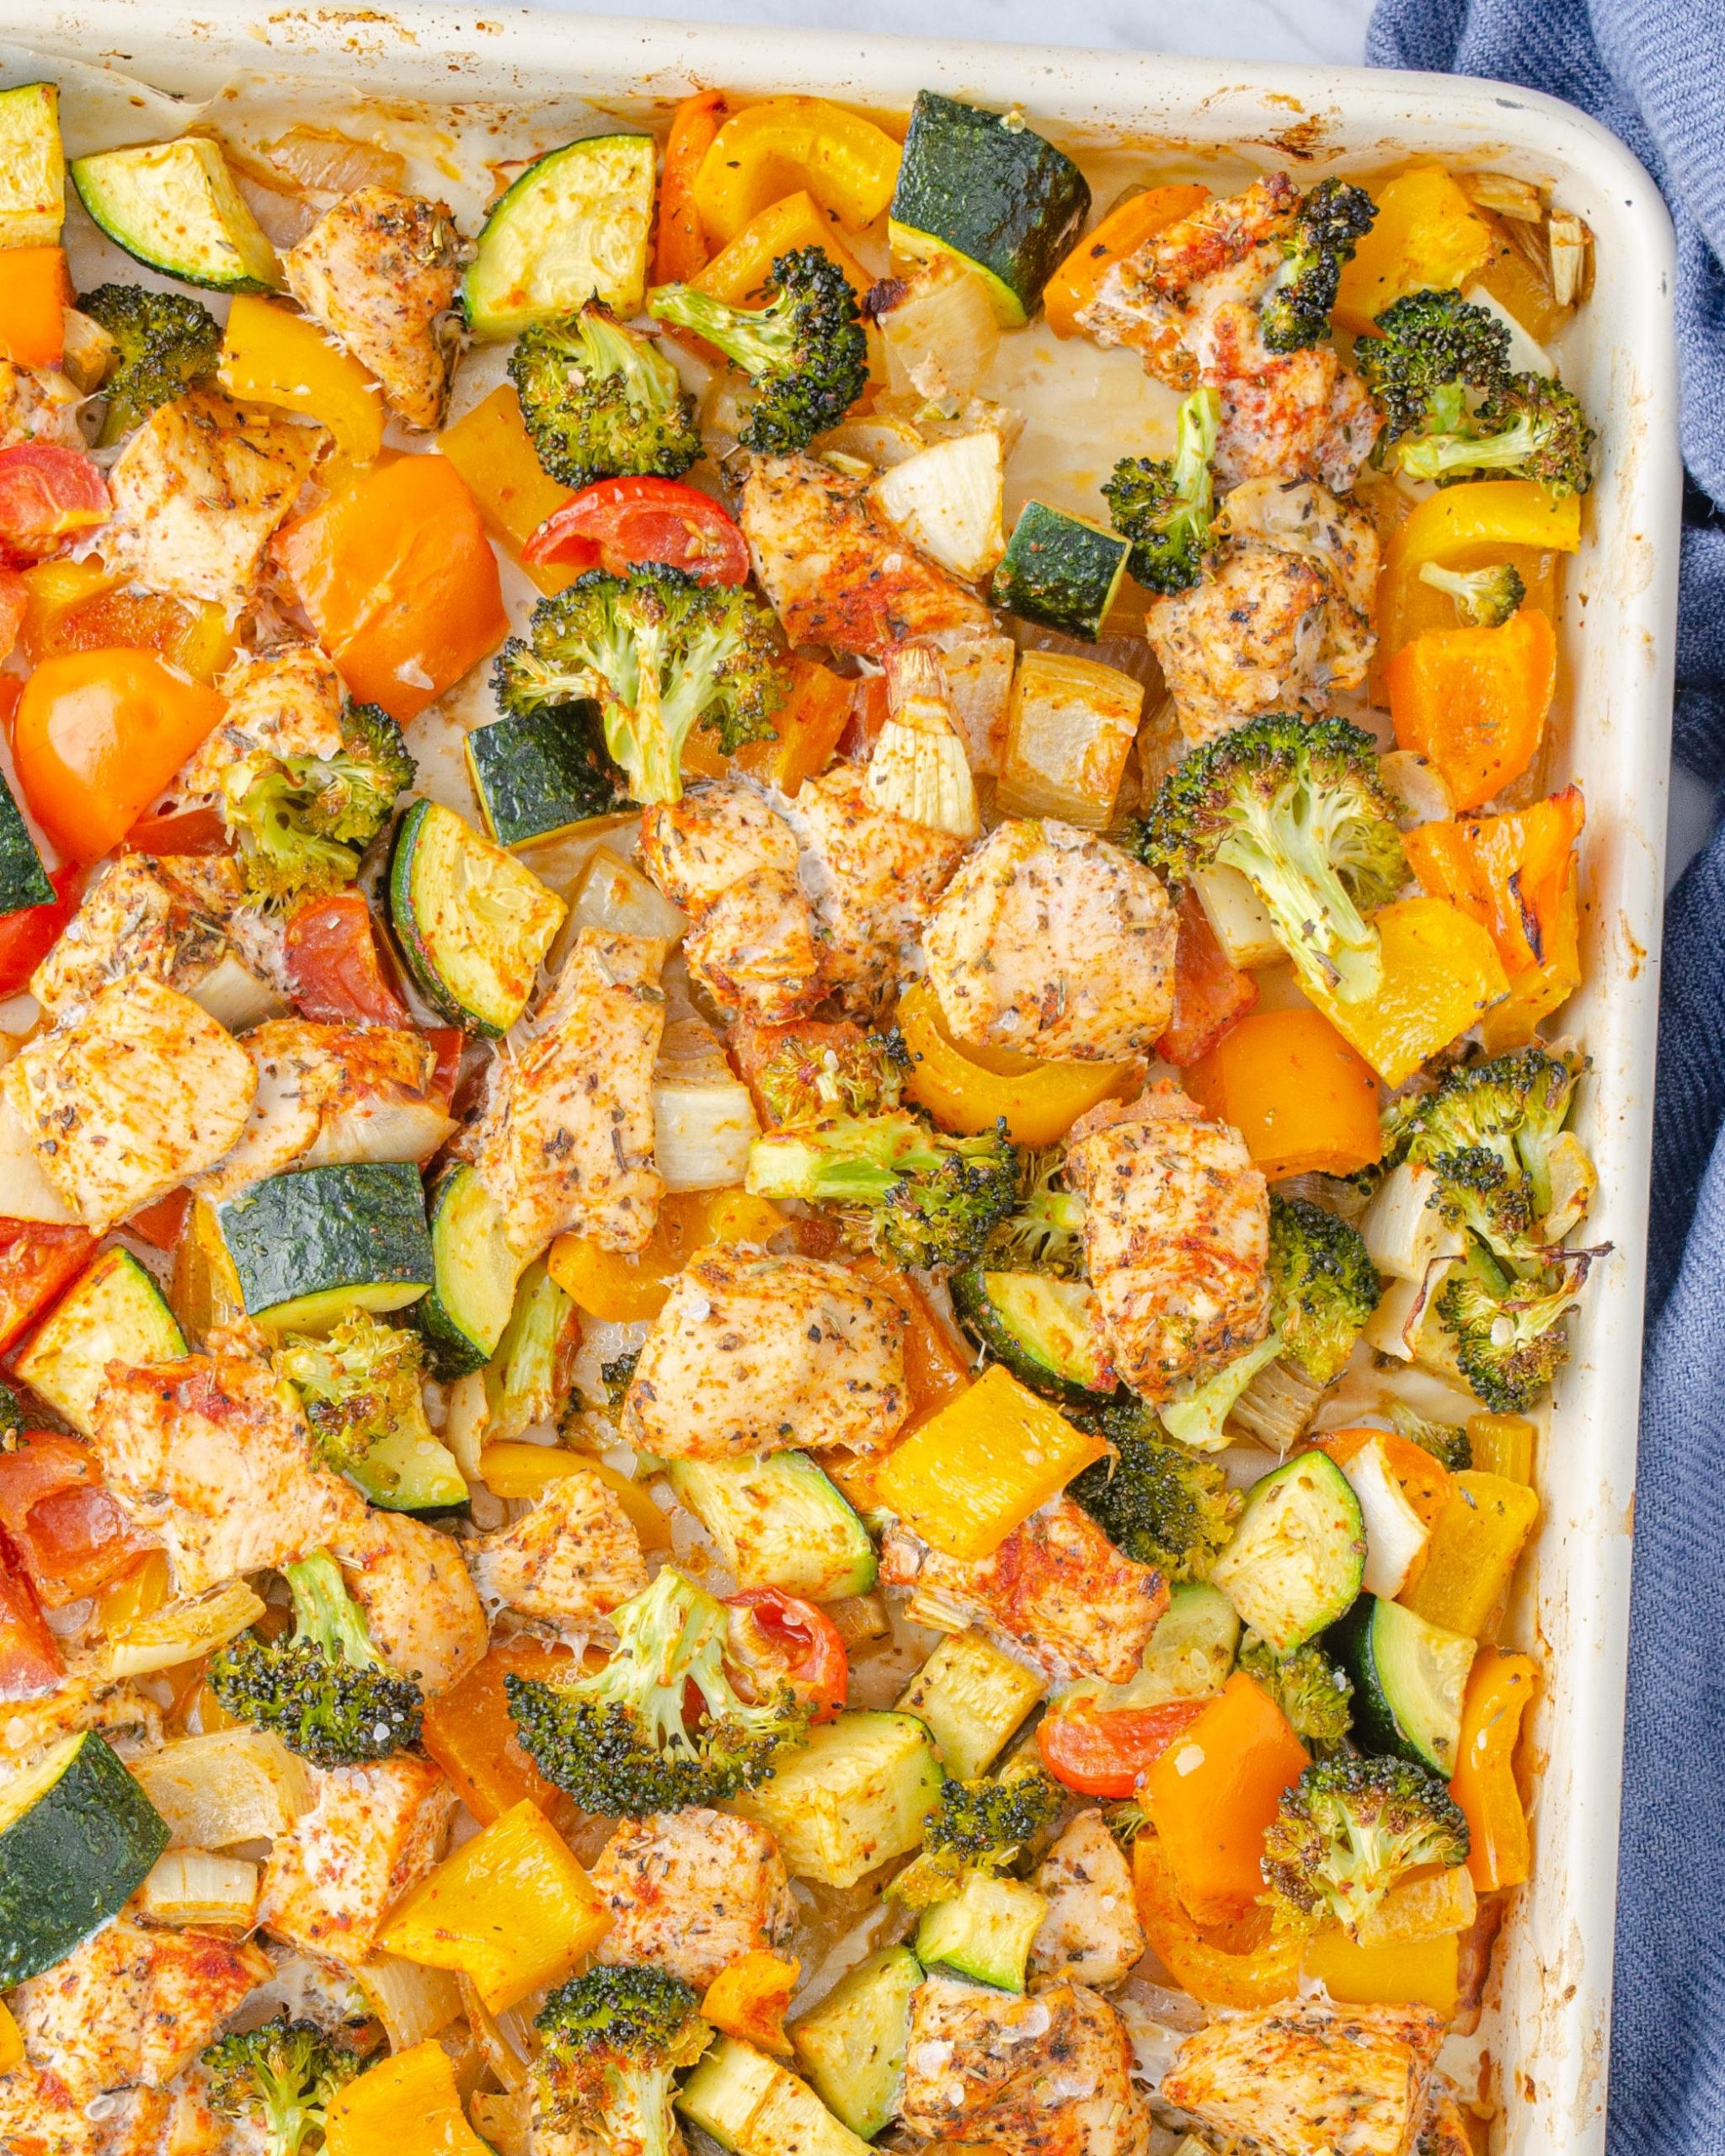 chicken and vegetable recipes, chicken and veggie recipes, roasted chicken and vegetables, 15 Minute Healthy Roasted Chicken and Veggies